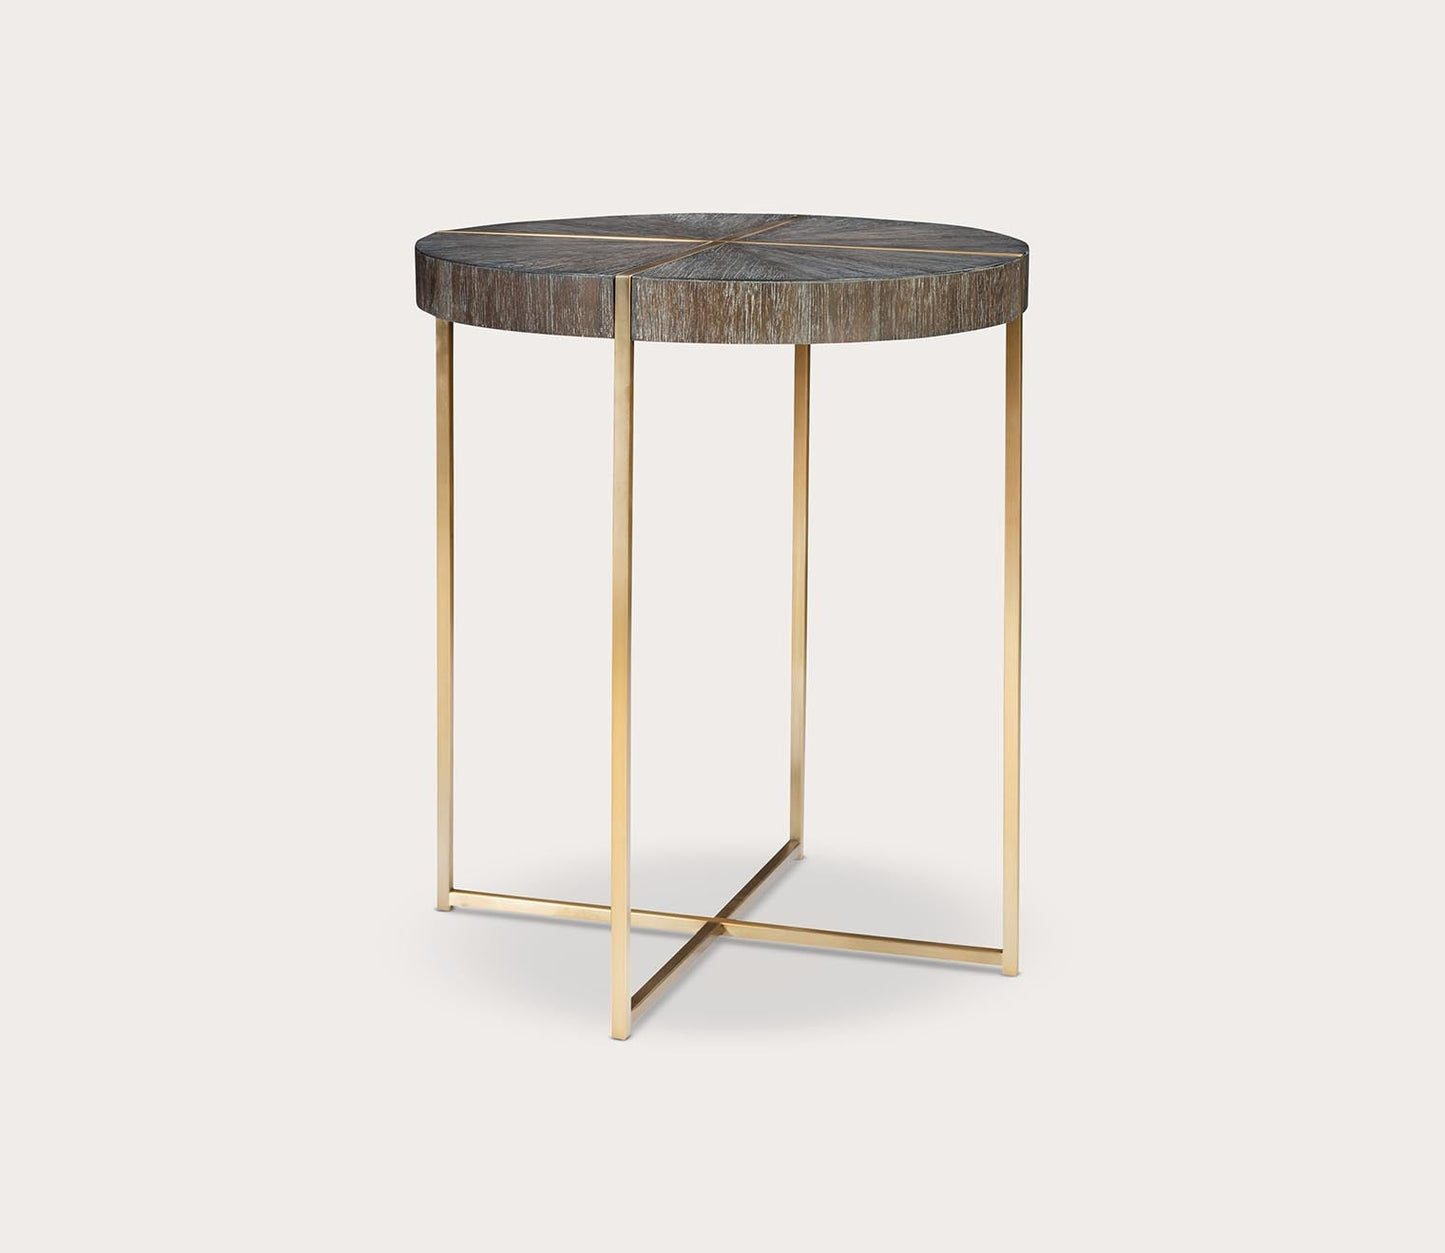 Taja Round Accent Table by Uttermost